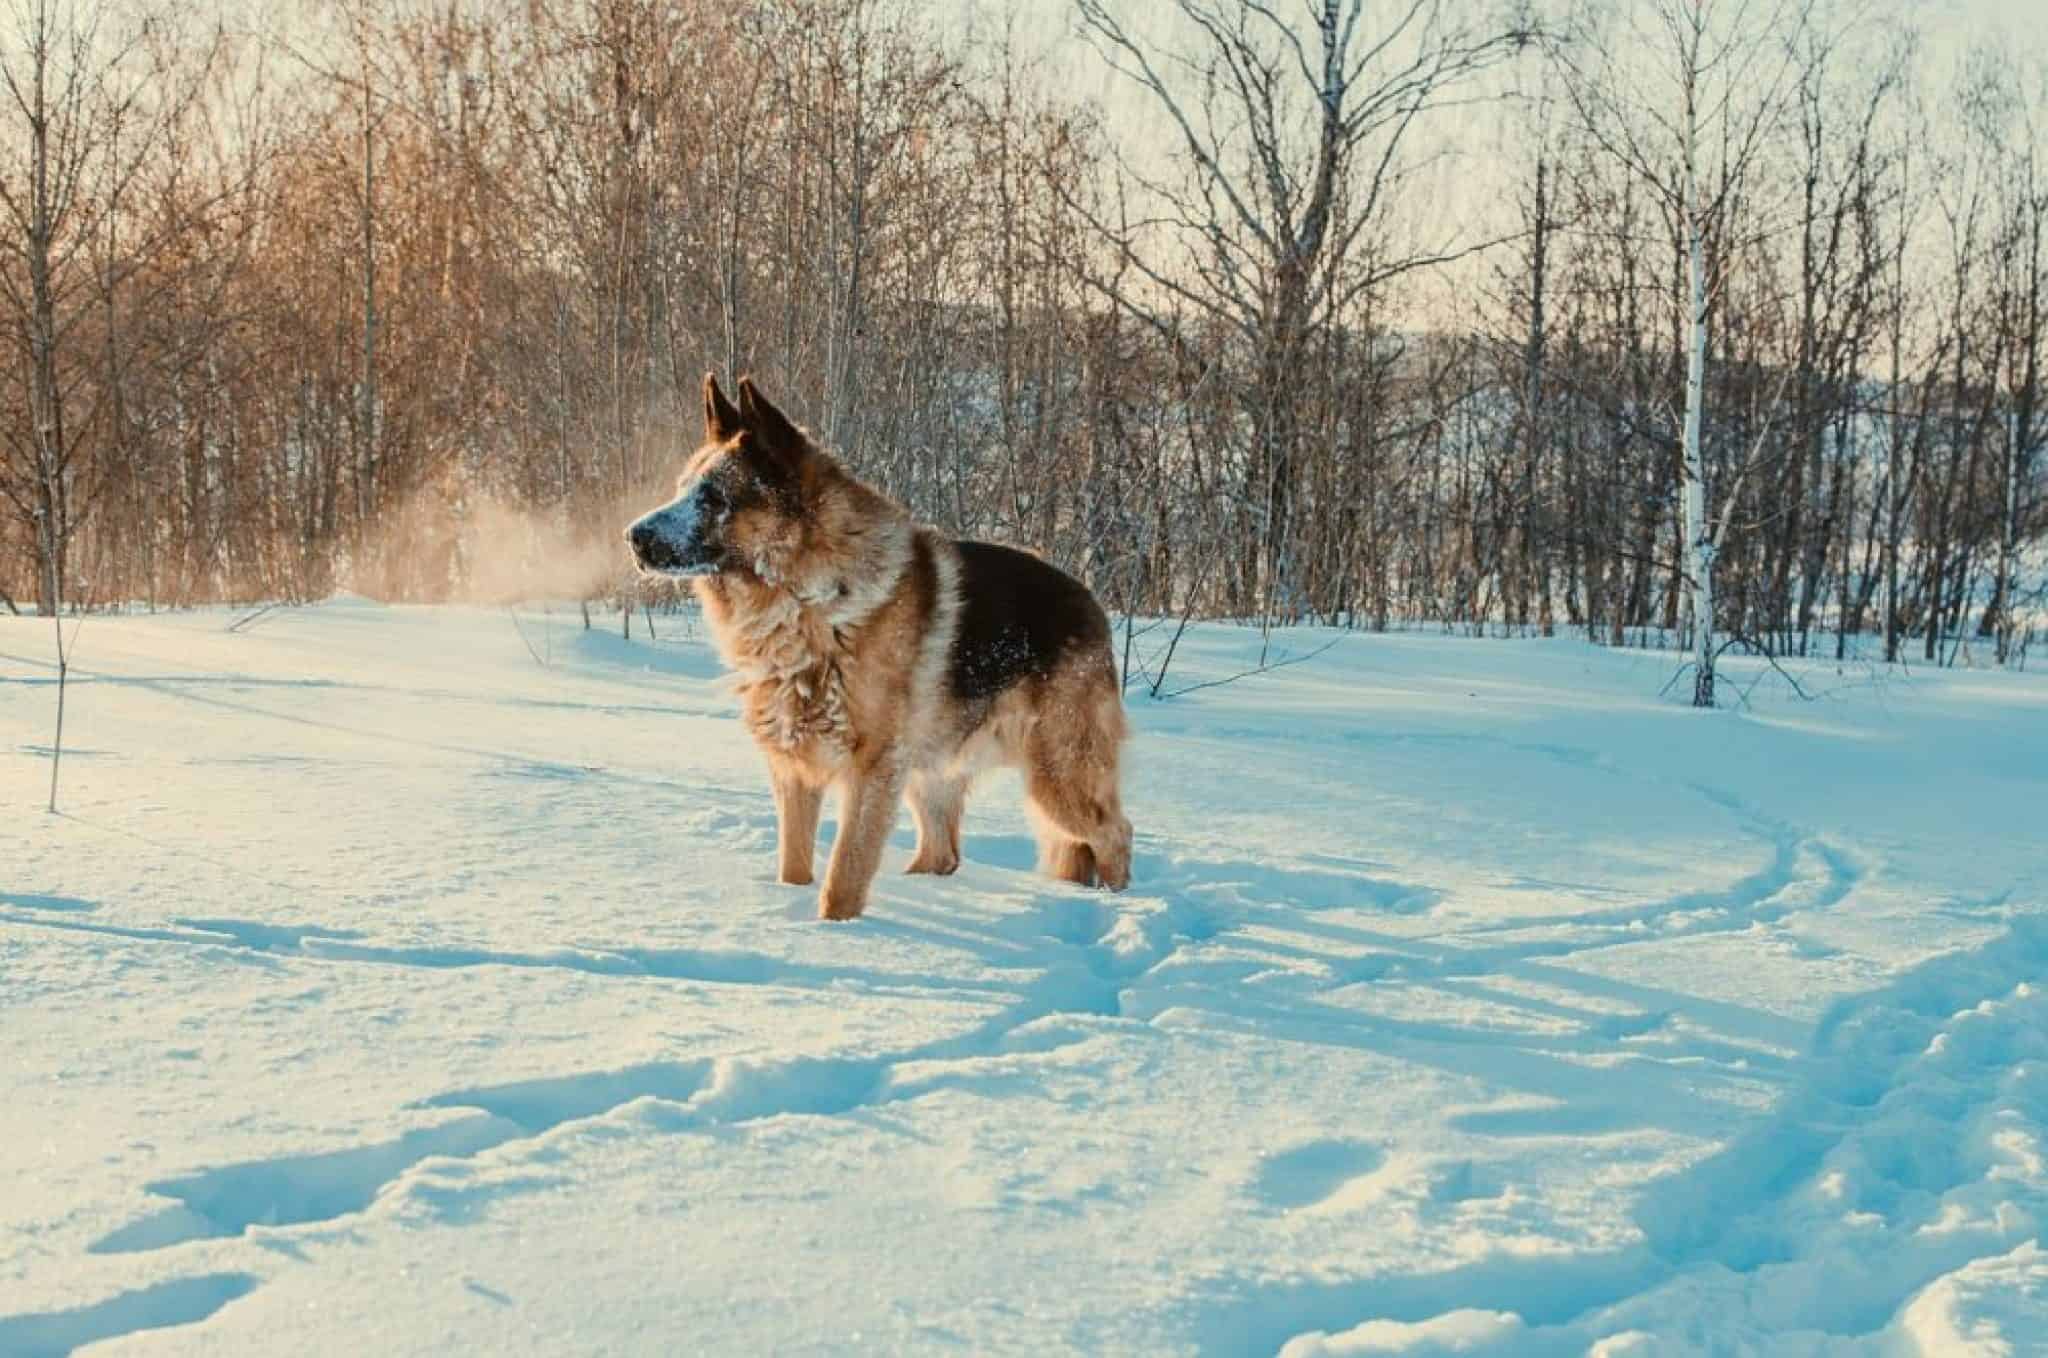 Do German Shepherds Need Snow Boots? (Answered!)